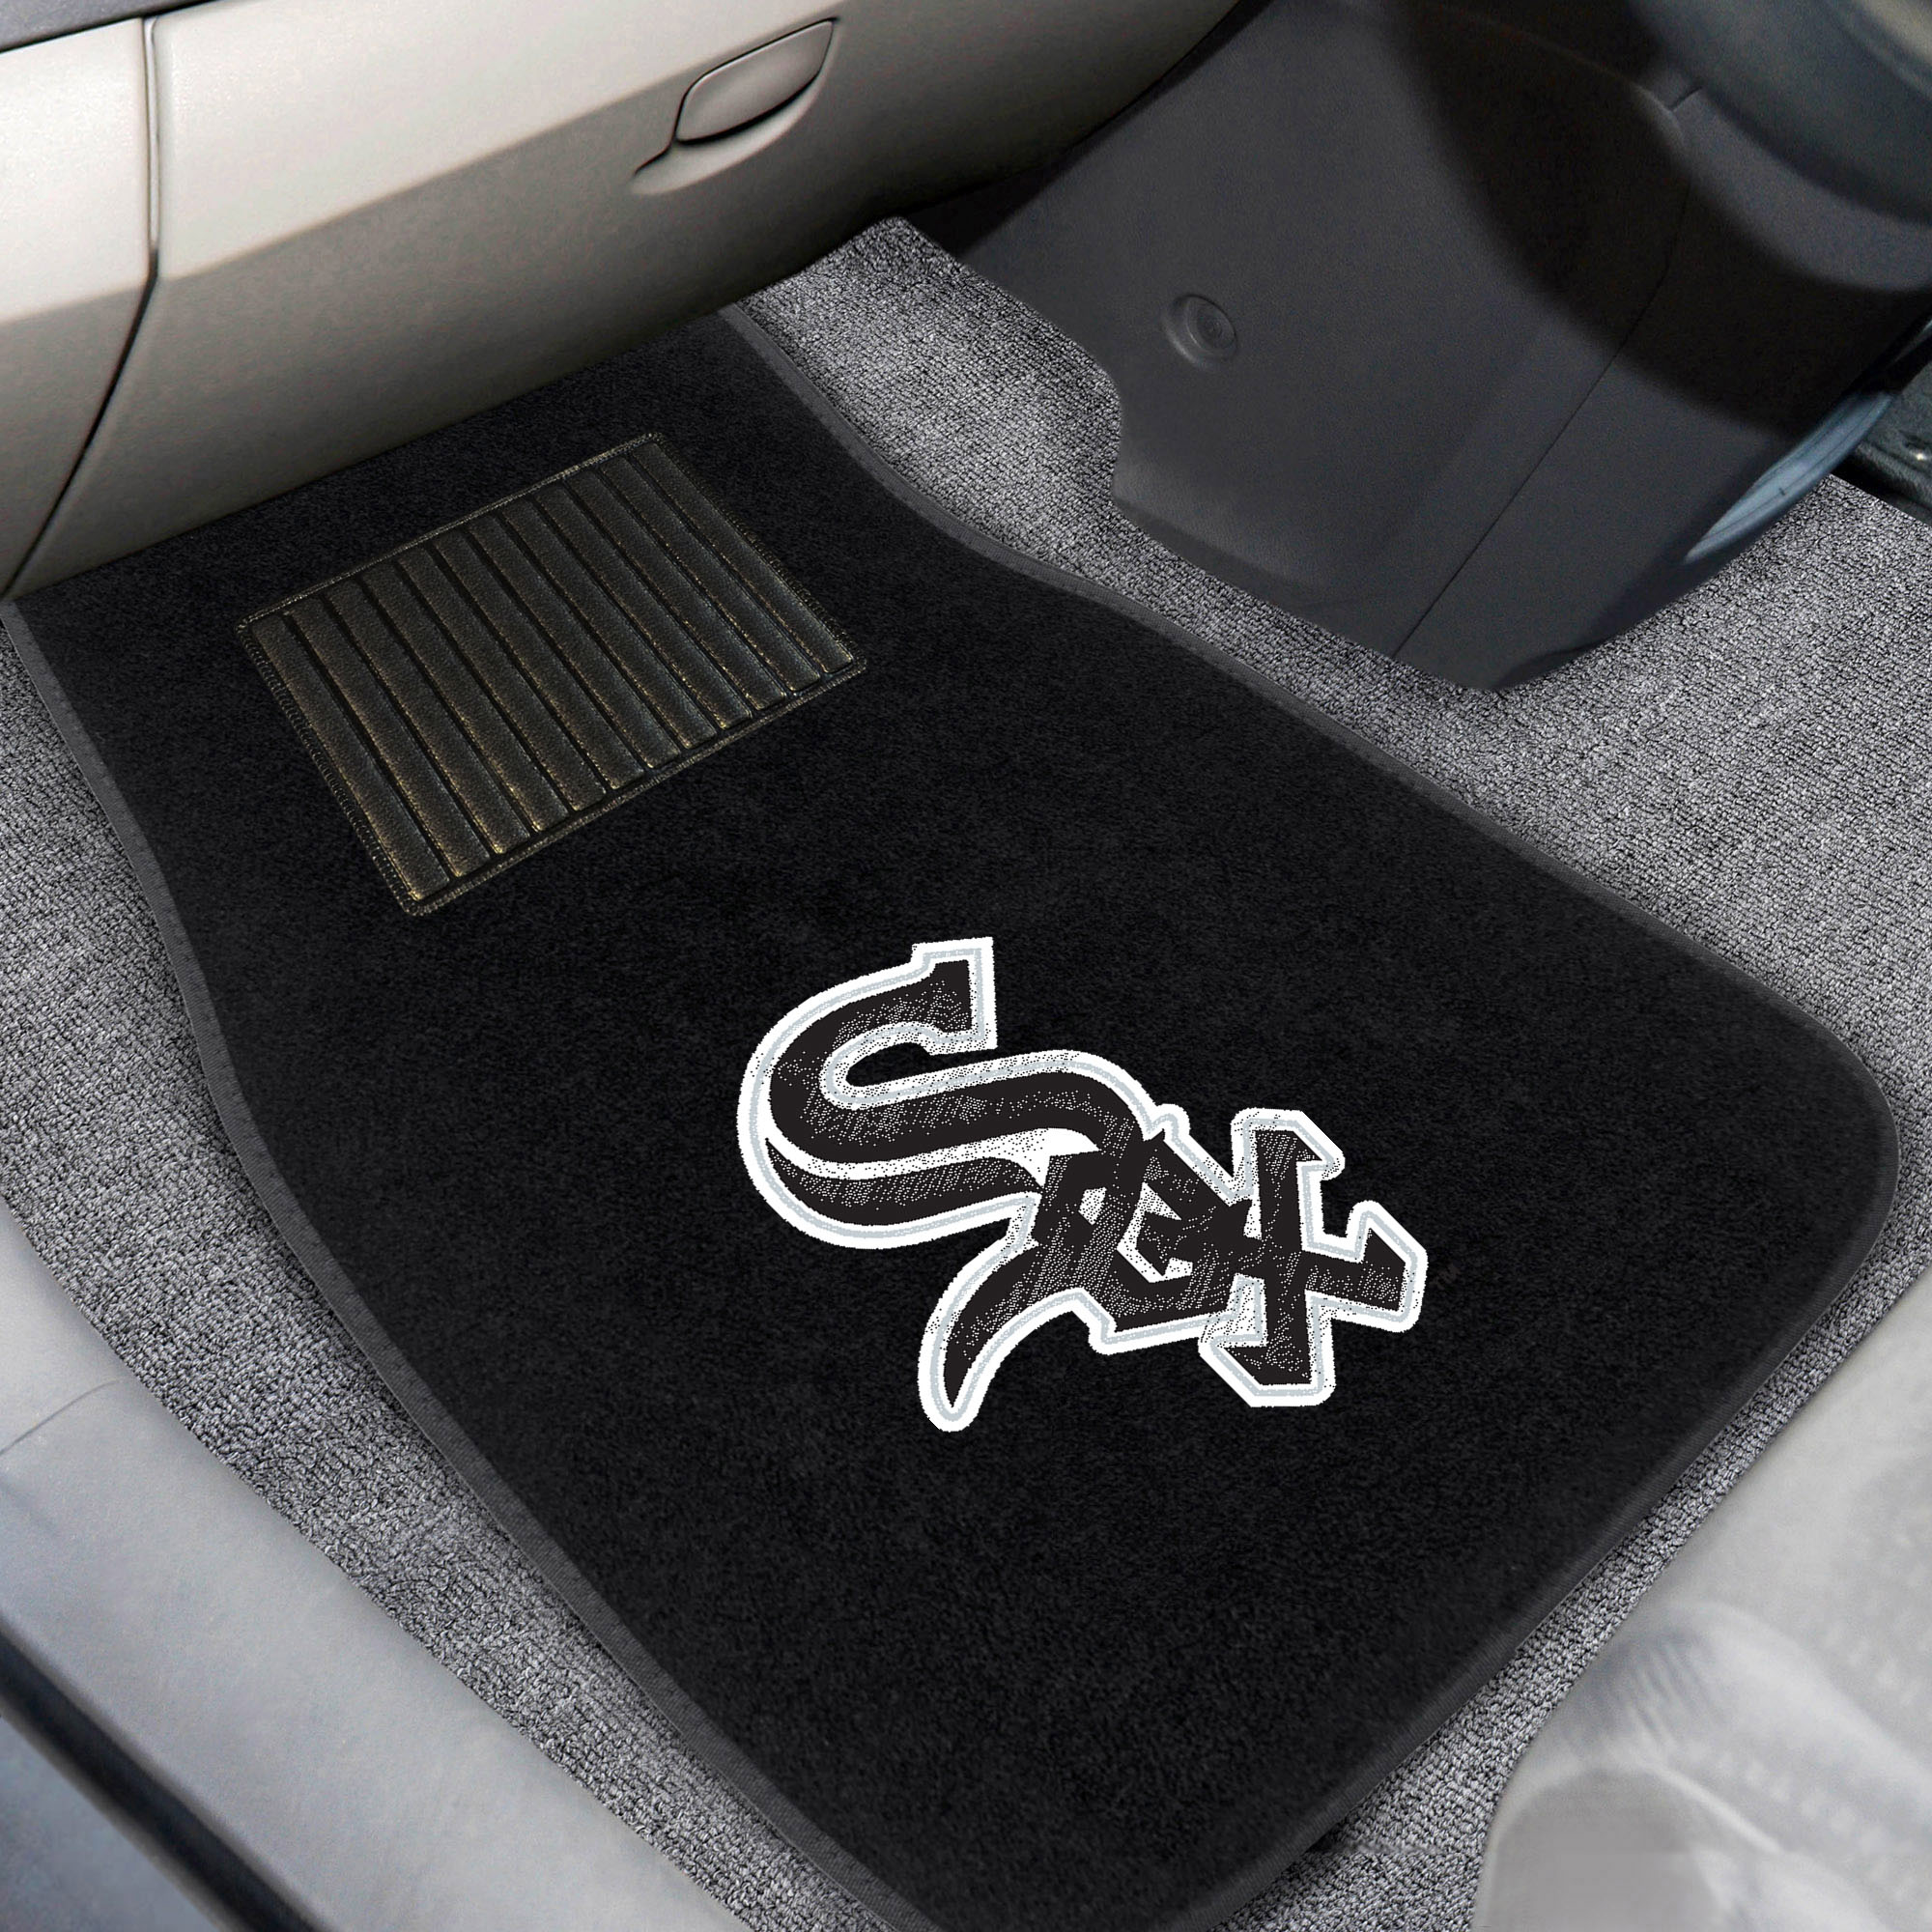 https://www.fanmats.com/images/thumbs/0003971_mlb-chicago-white-sox-2-piece-embroidered-car-mat-set.jpeg